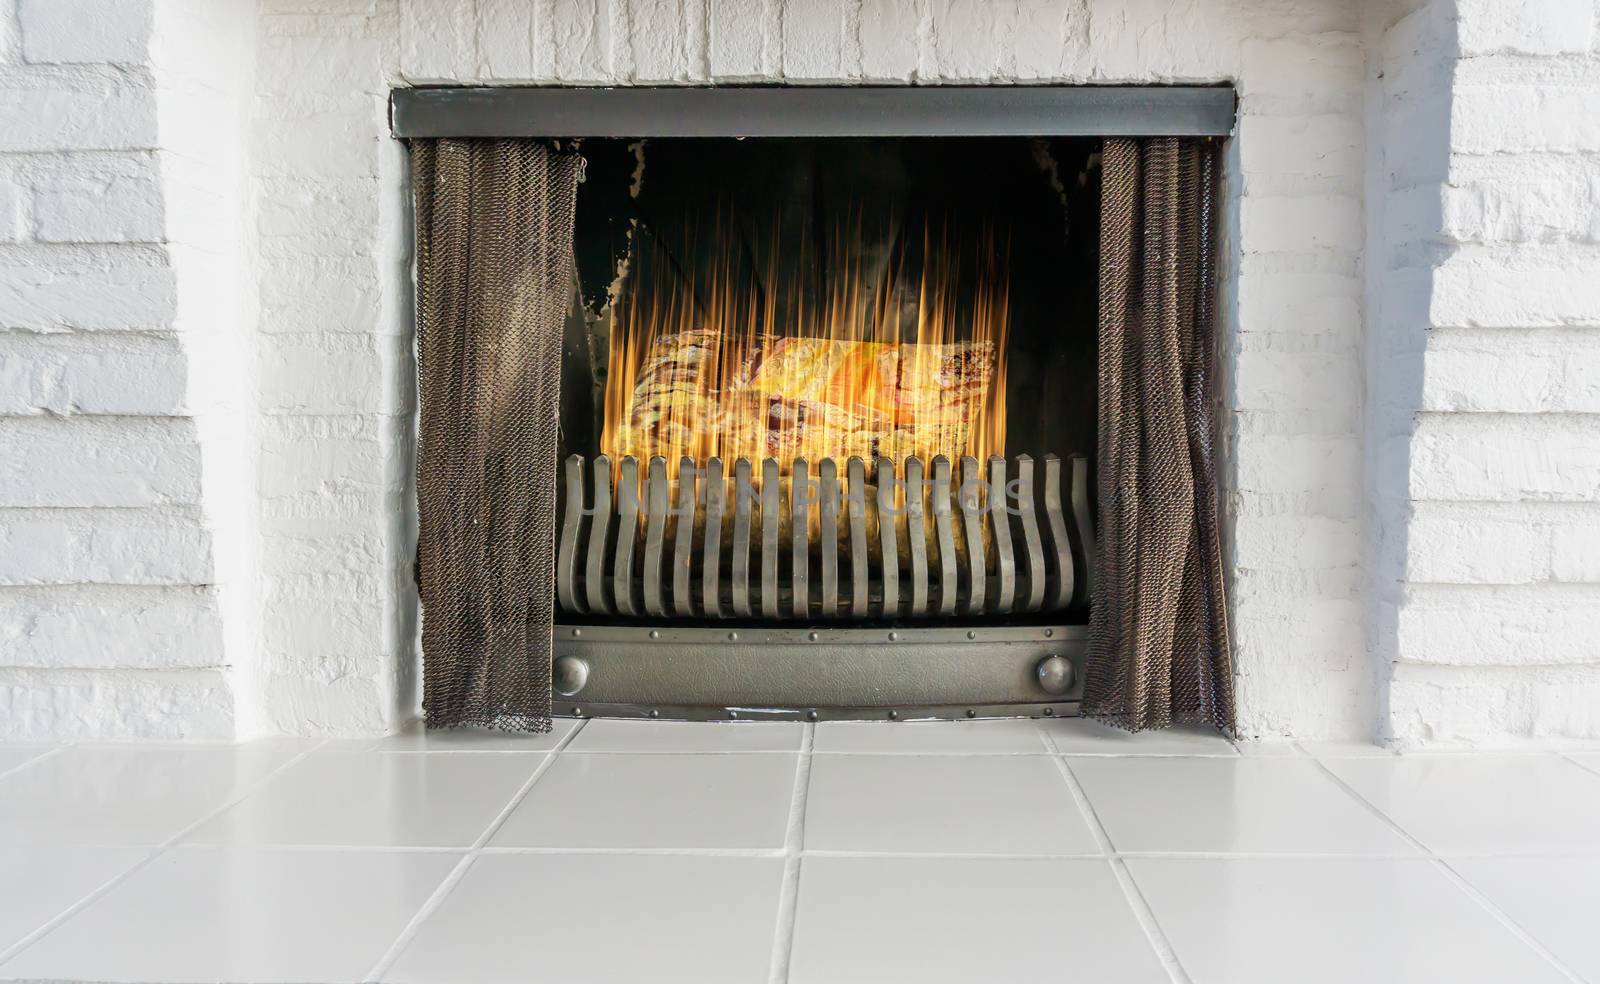 lighted and burning fireplace in retro style but with a modern look background architecture is of white brick stones and white tiling by charlottebleijenberg